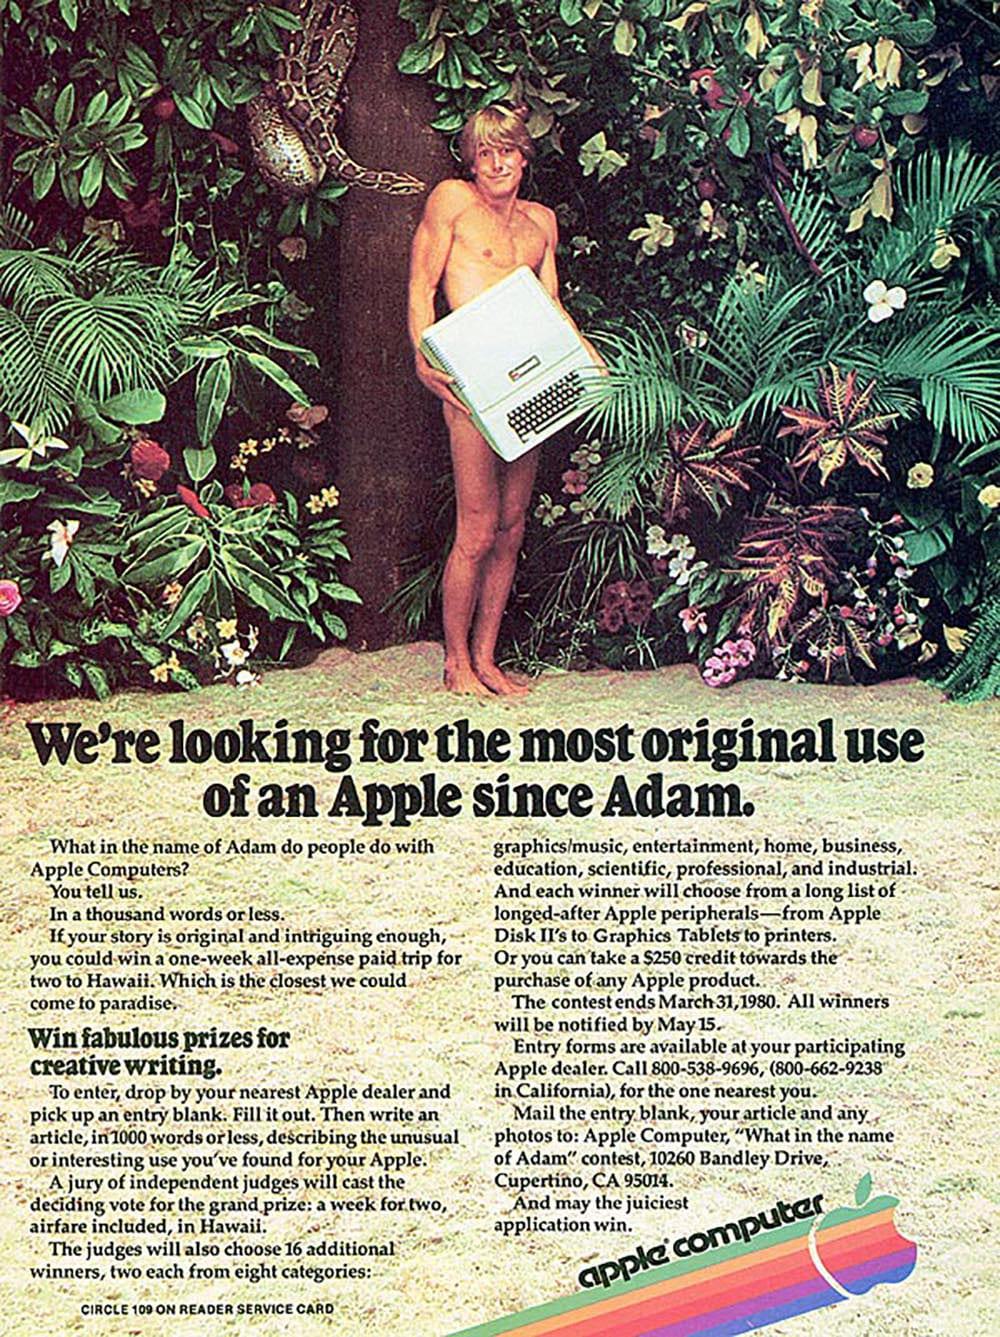 Biblical Advertisement by Apple Computer in 1977